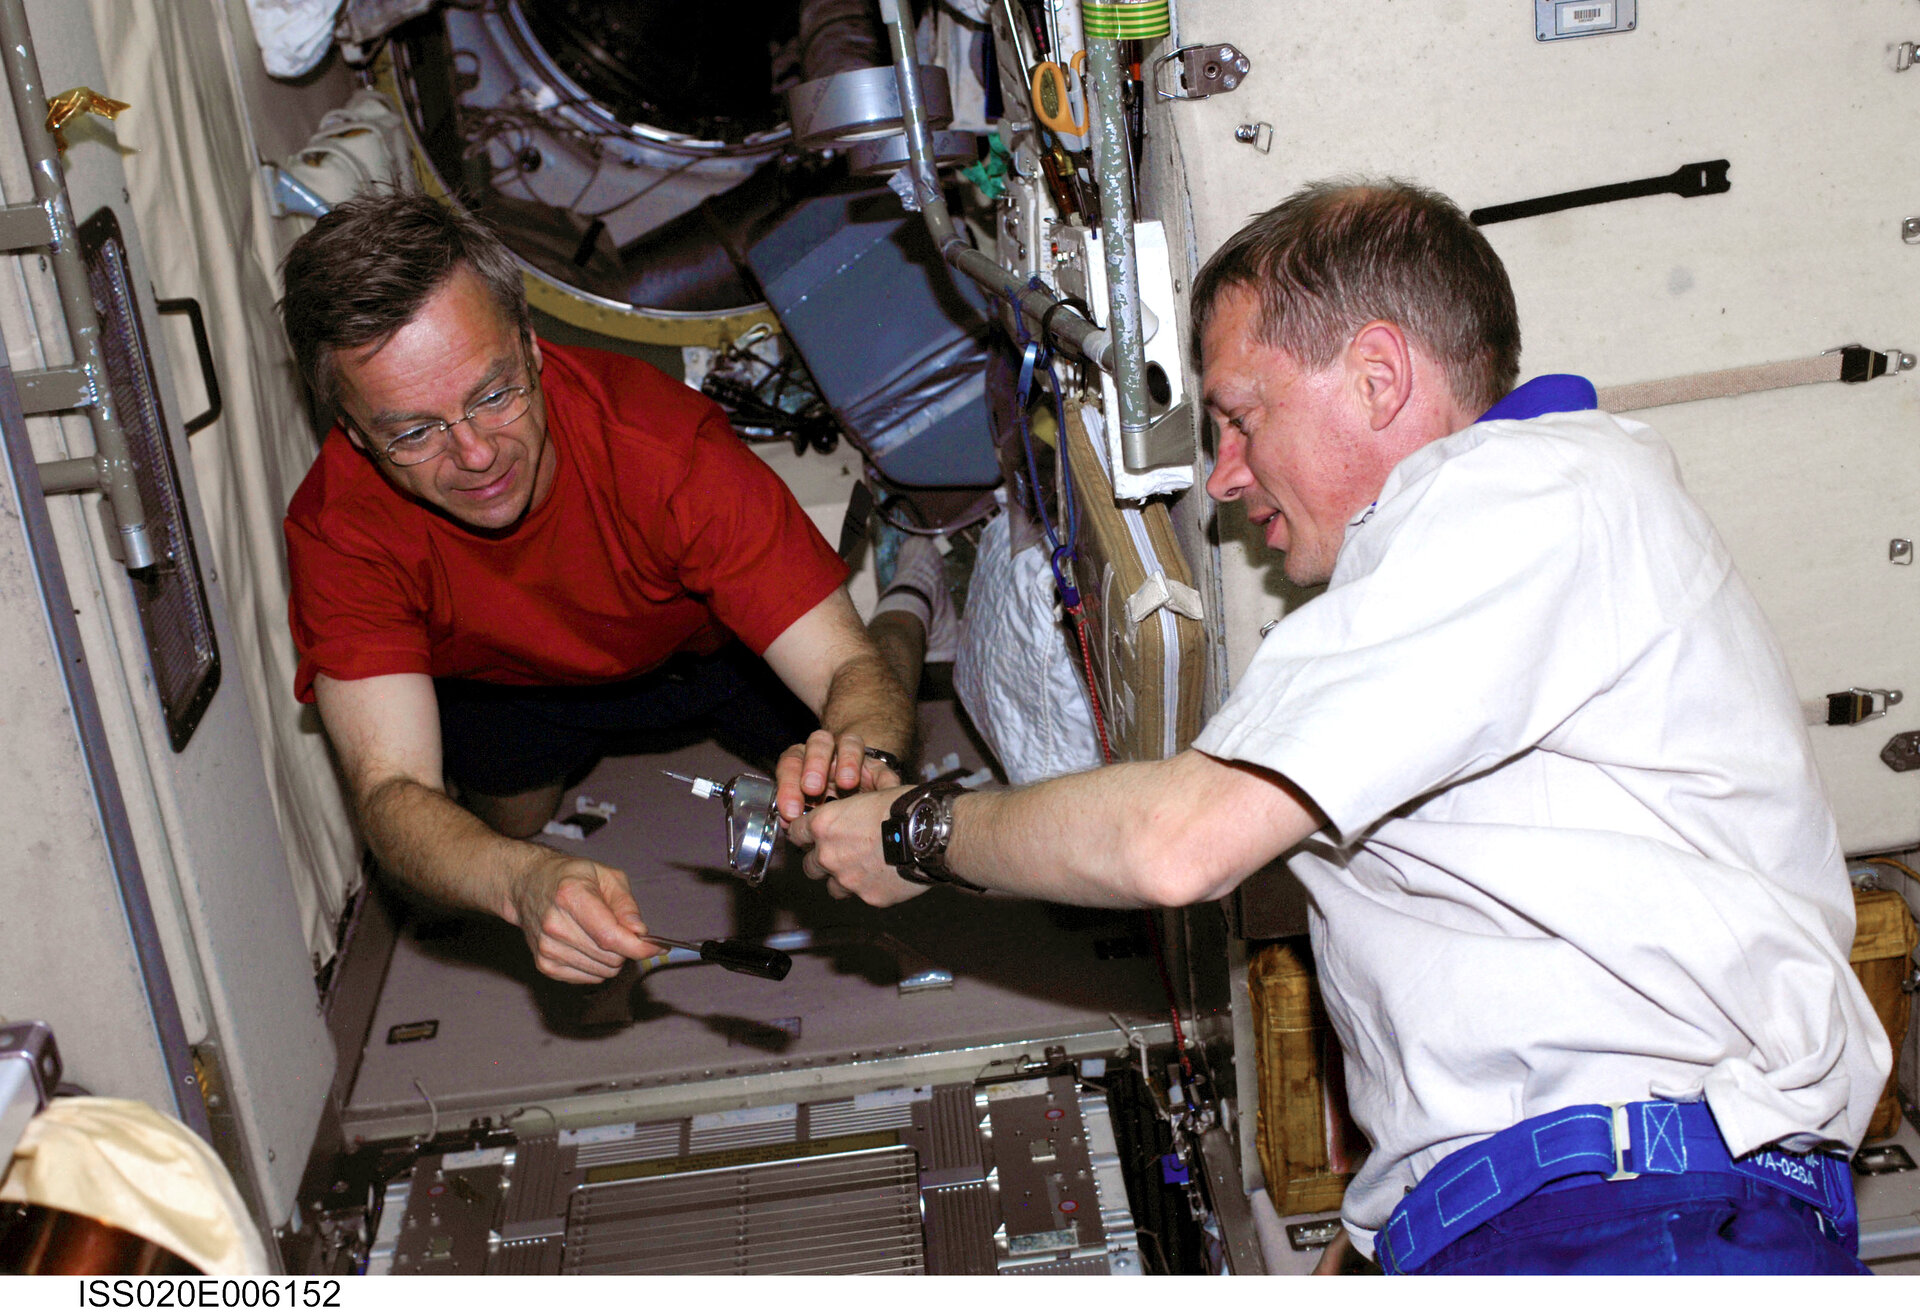 De Winne and Thirsk perform maintenance of the treadmill in Zvezda